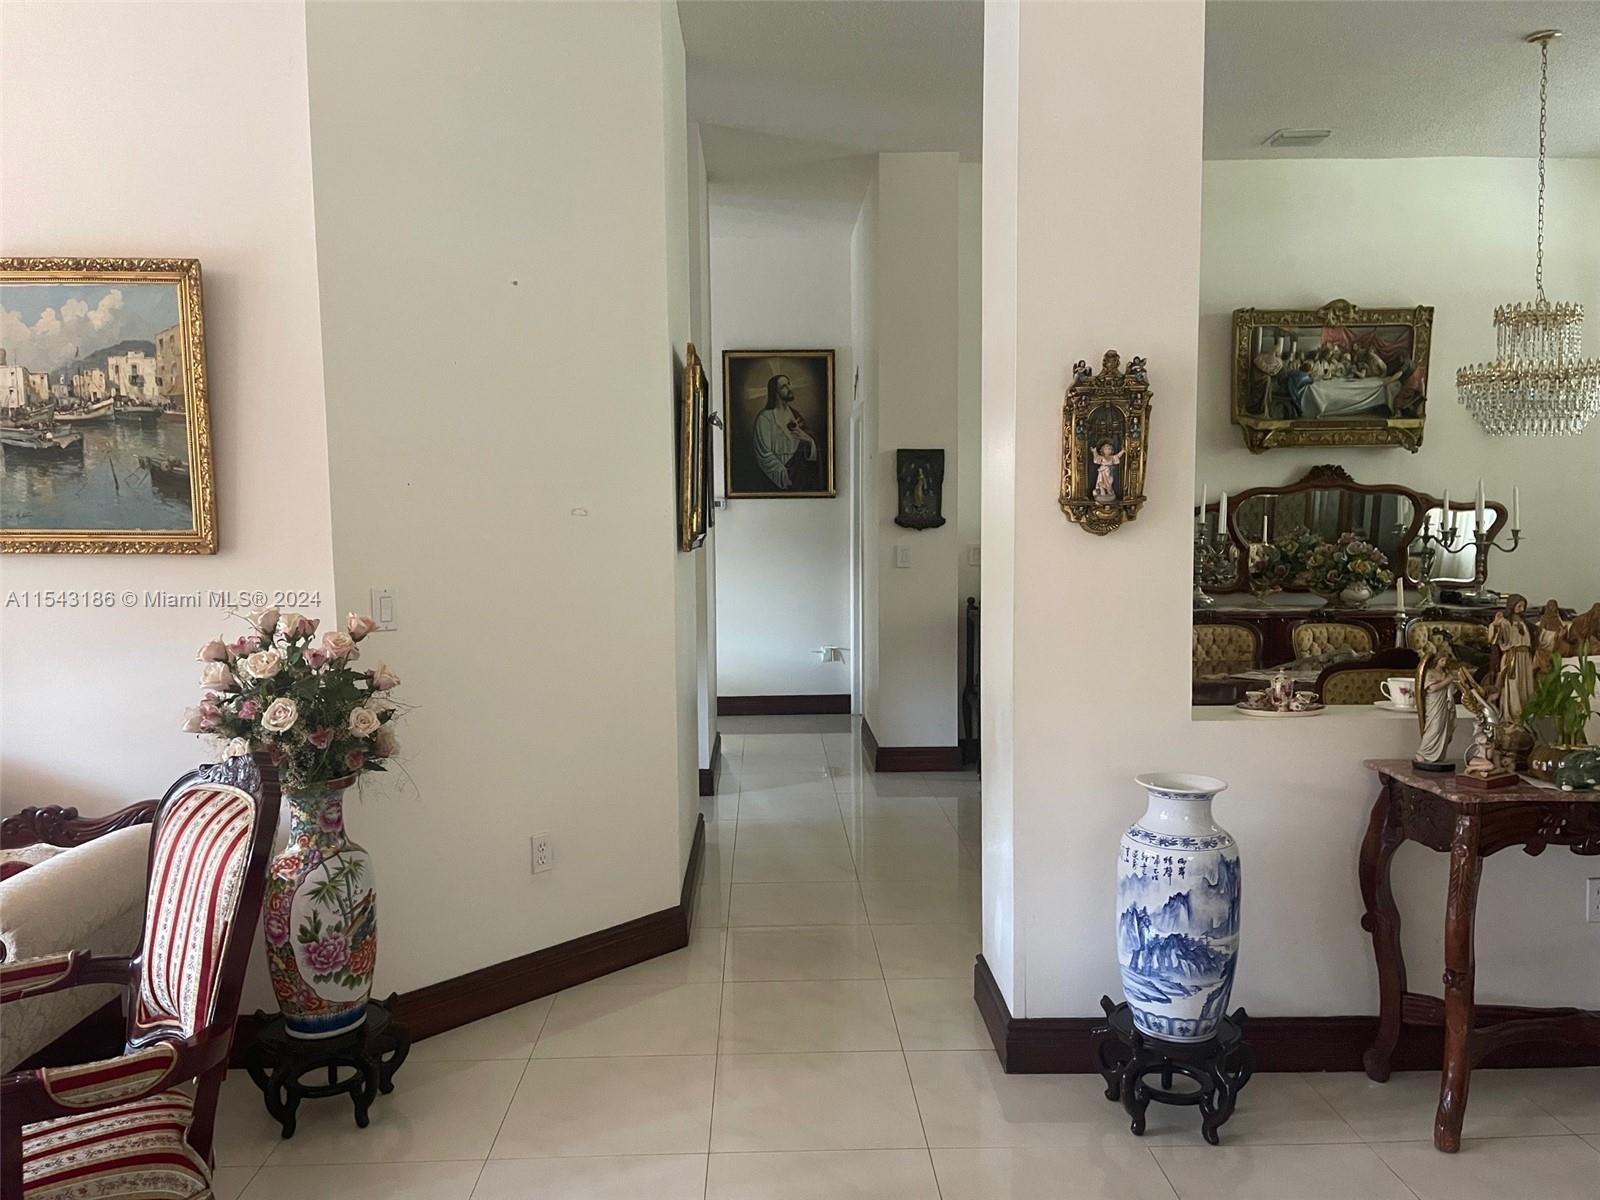 7262 SW 120th Avenue, Miami, Florida, 33183, United States, 5 Bedrooms Bedrooms, ,4 BathroomsBathrooms,Residential,For Sale,7262 SW 120th Avenue,1486070